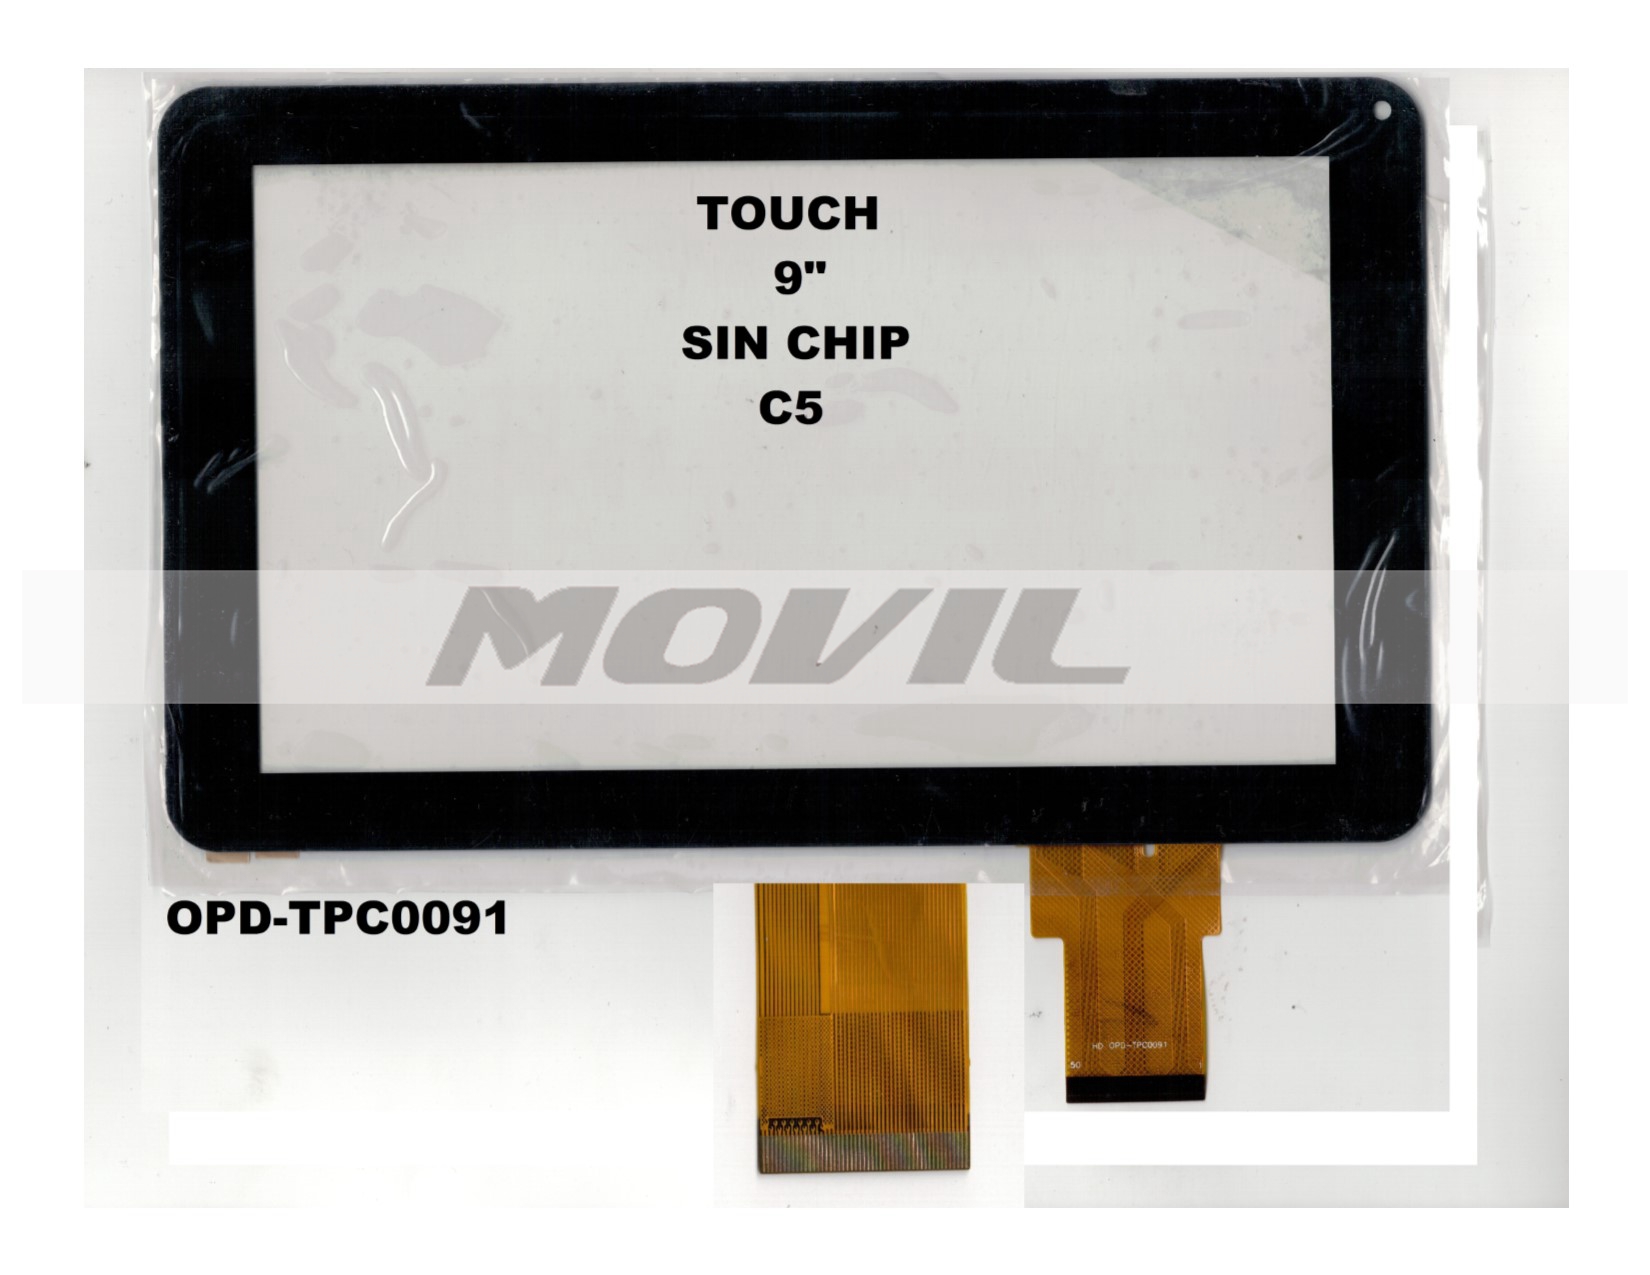 Touch tactil para tablet flex 9 inch SIN CHIP C5 OPD-TPC0091